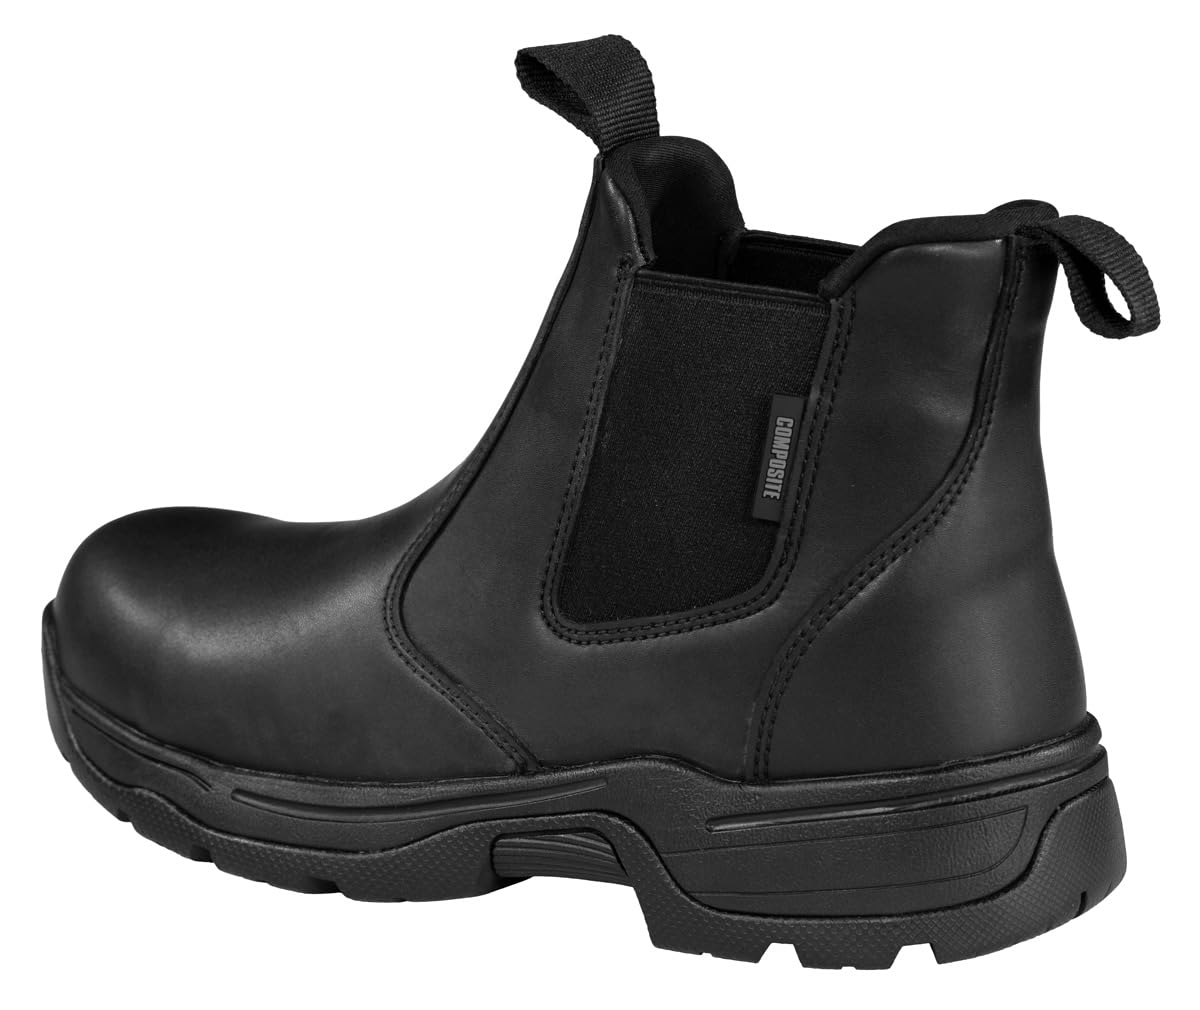 Propper Men's F45351T Fire and Safety Shoe, Black, 12.5 Wide